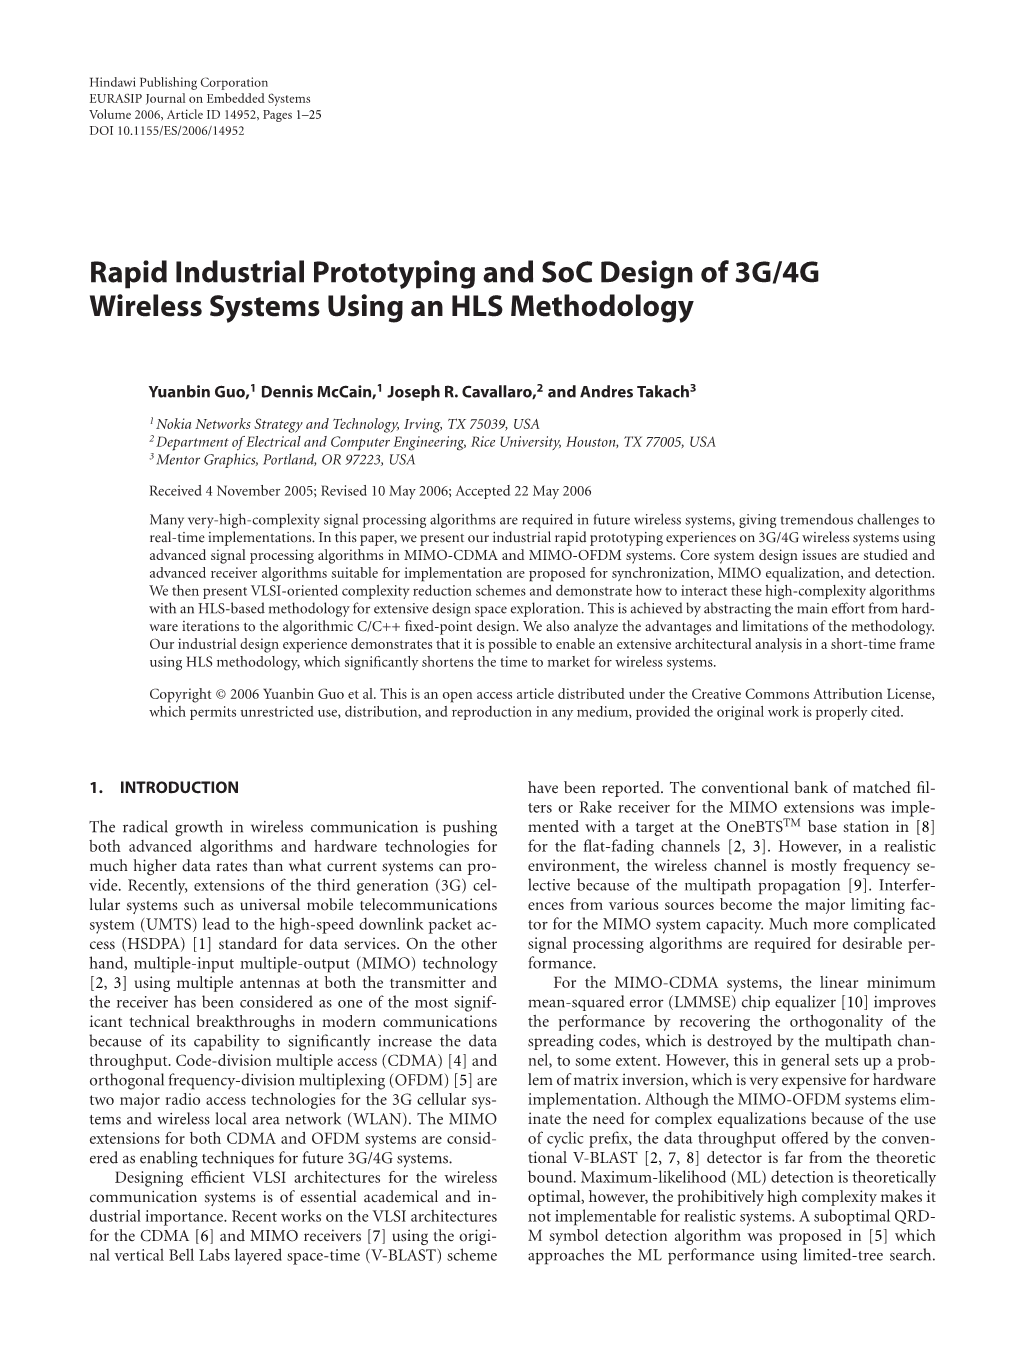 Rapid Industrial Prototyping and Soc Design of 3G/4G Wireless Systems Using an HLS Methodology